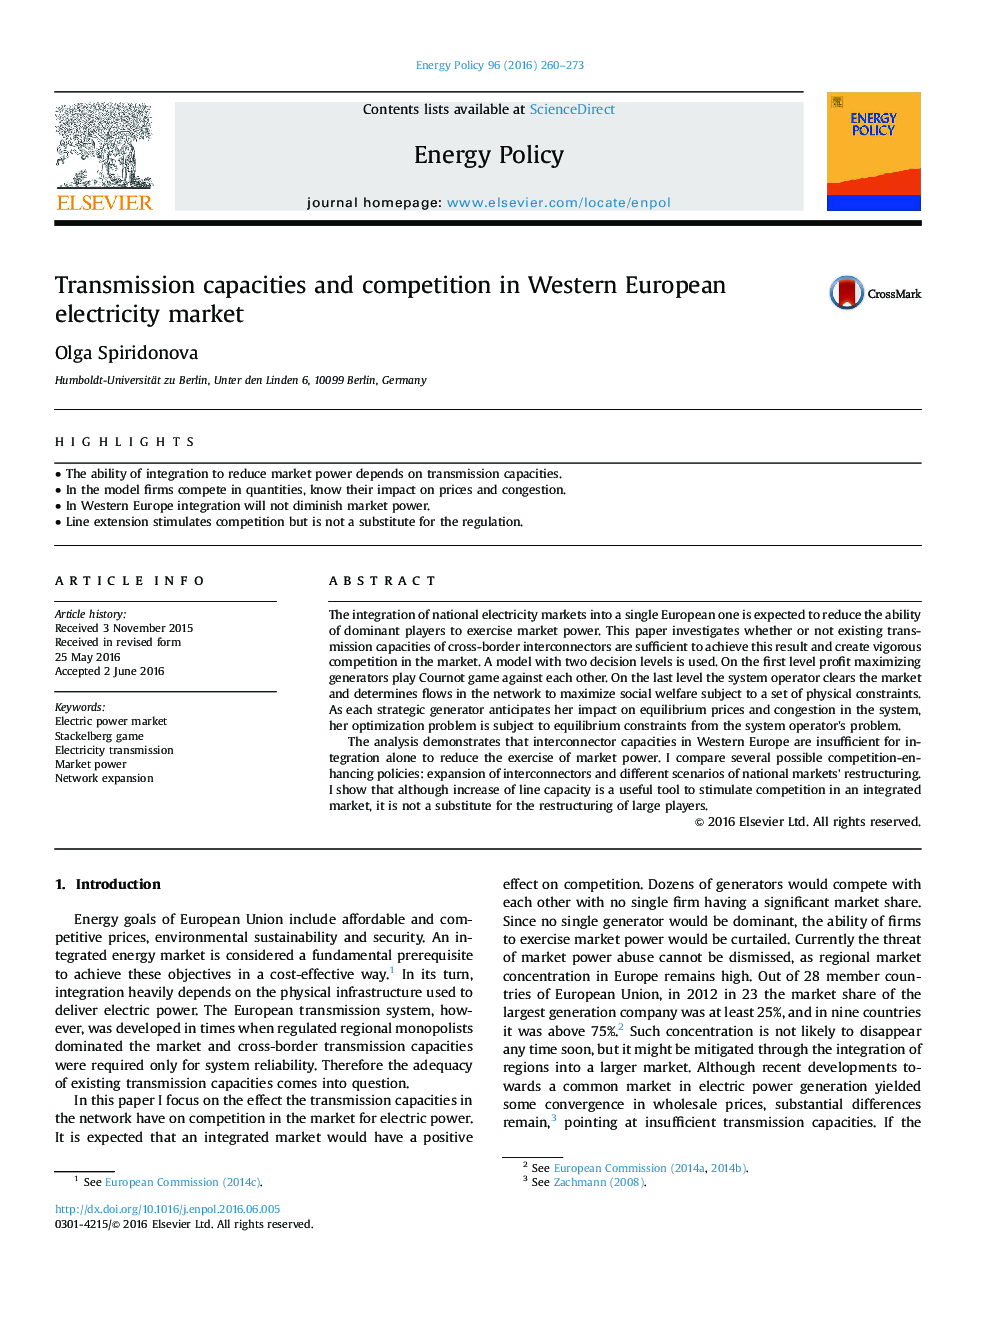 Transmission capacities and competition in Western European electricity market